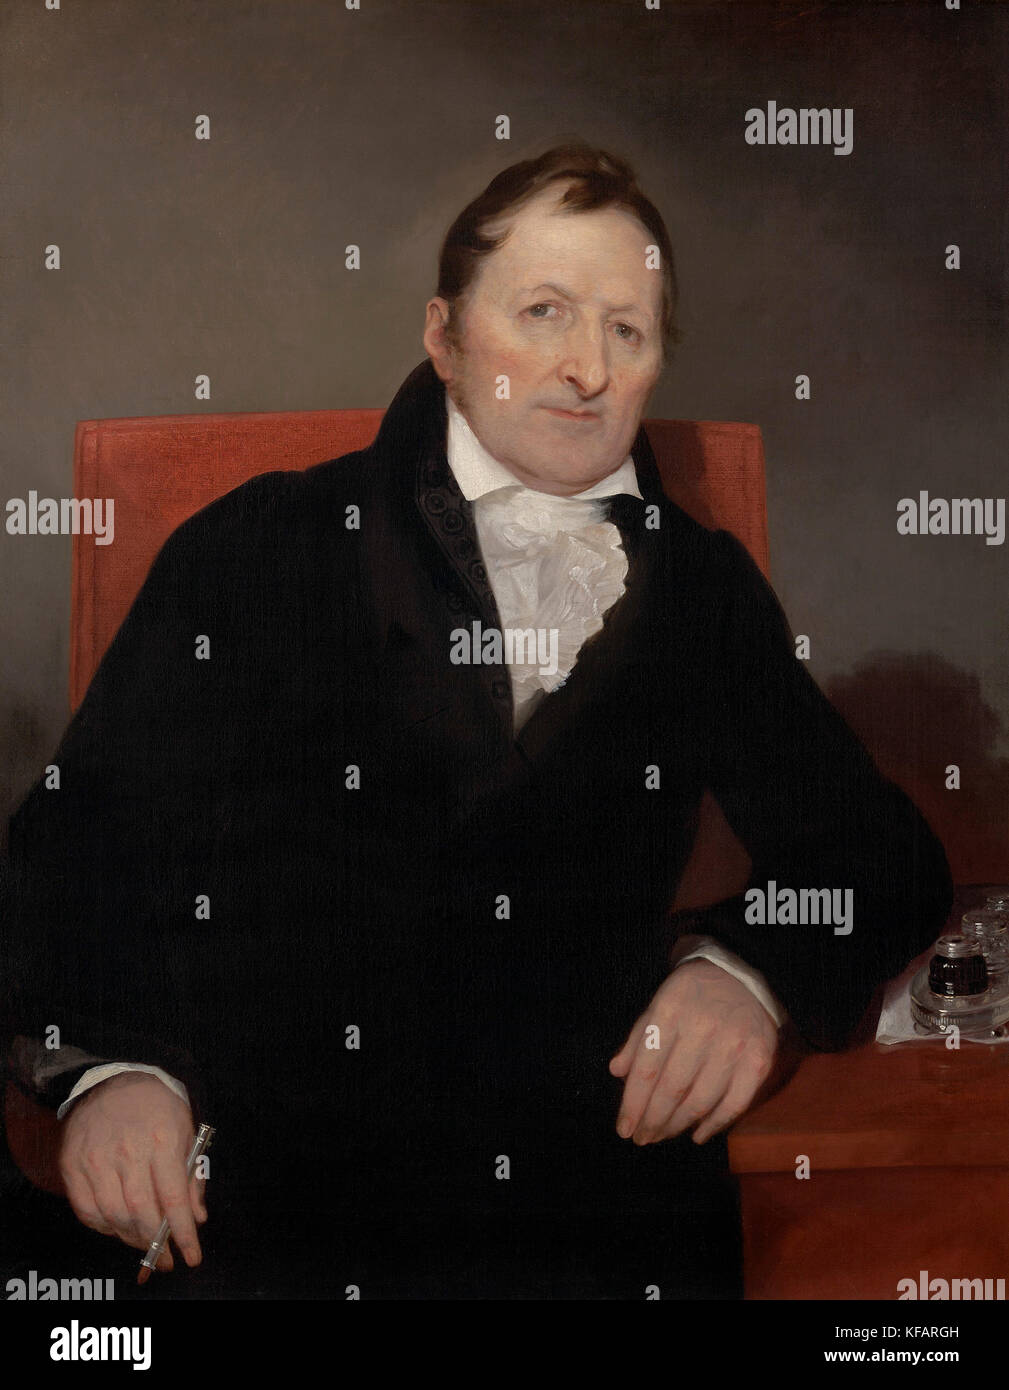 Eli Whitney, Eli Whitney, American inventor best known for inventing the cotton gin Stock Photo